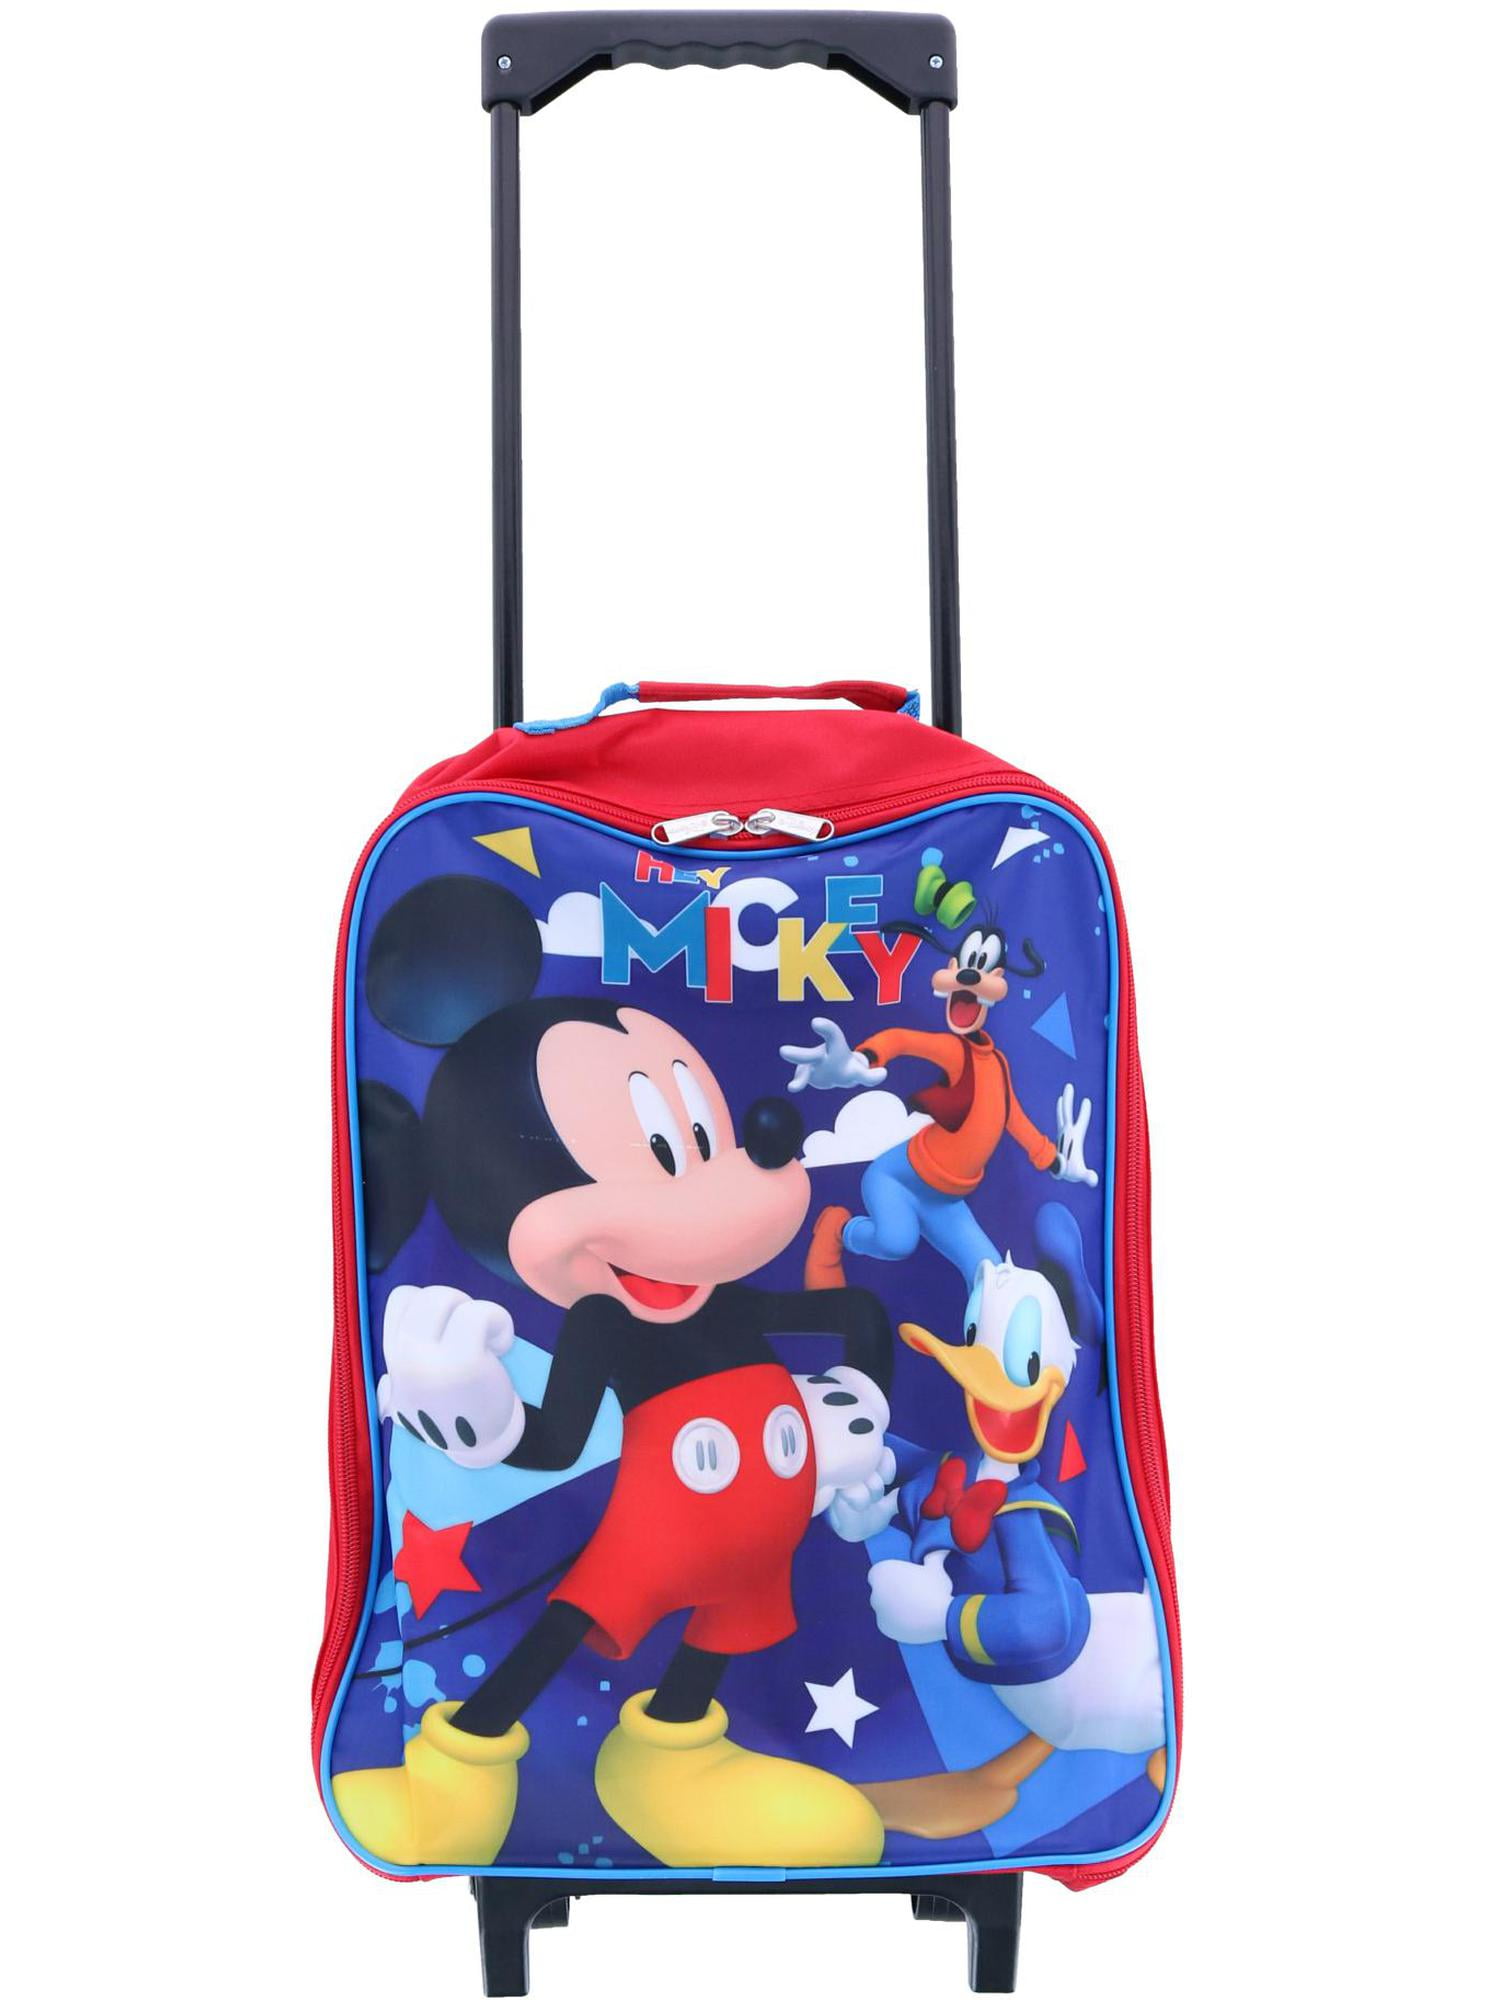 Prettyshop4246 Kid Luggage Suitcase Backpack Adorable Animal Pattern on a Luggage Set of 2 Pcs Kid Suitcase Backpack Multi Wheel Trip Travel Visit Grandparent or Friend School Storage Sturdy Modern